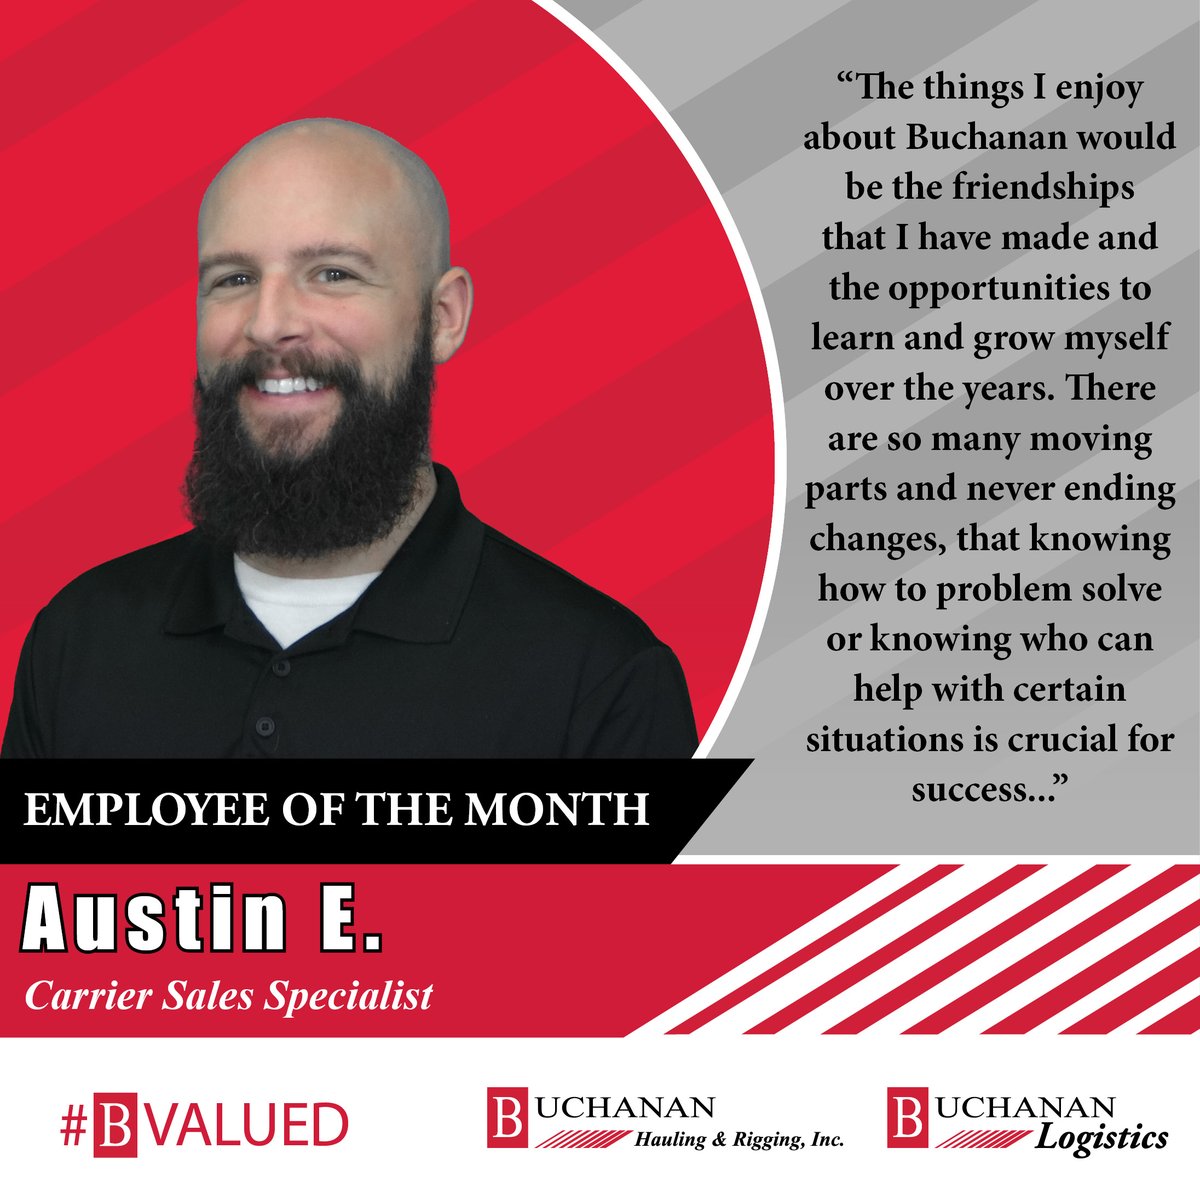 Happy Hump Day and congratulations to Austin E. on Employee of the Month!
“The things I enjoy about Buchanan would be the friendships that I have made and the opportunities to learn and grow myself over the years...'

#BValued #FleetManagement #LogisticsManagement #Good Wednesday